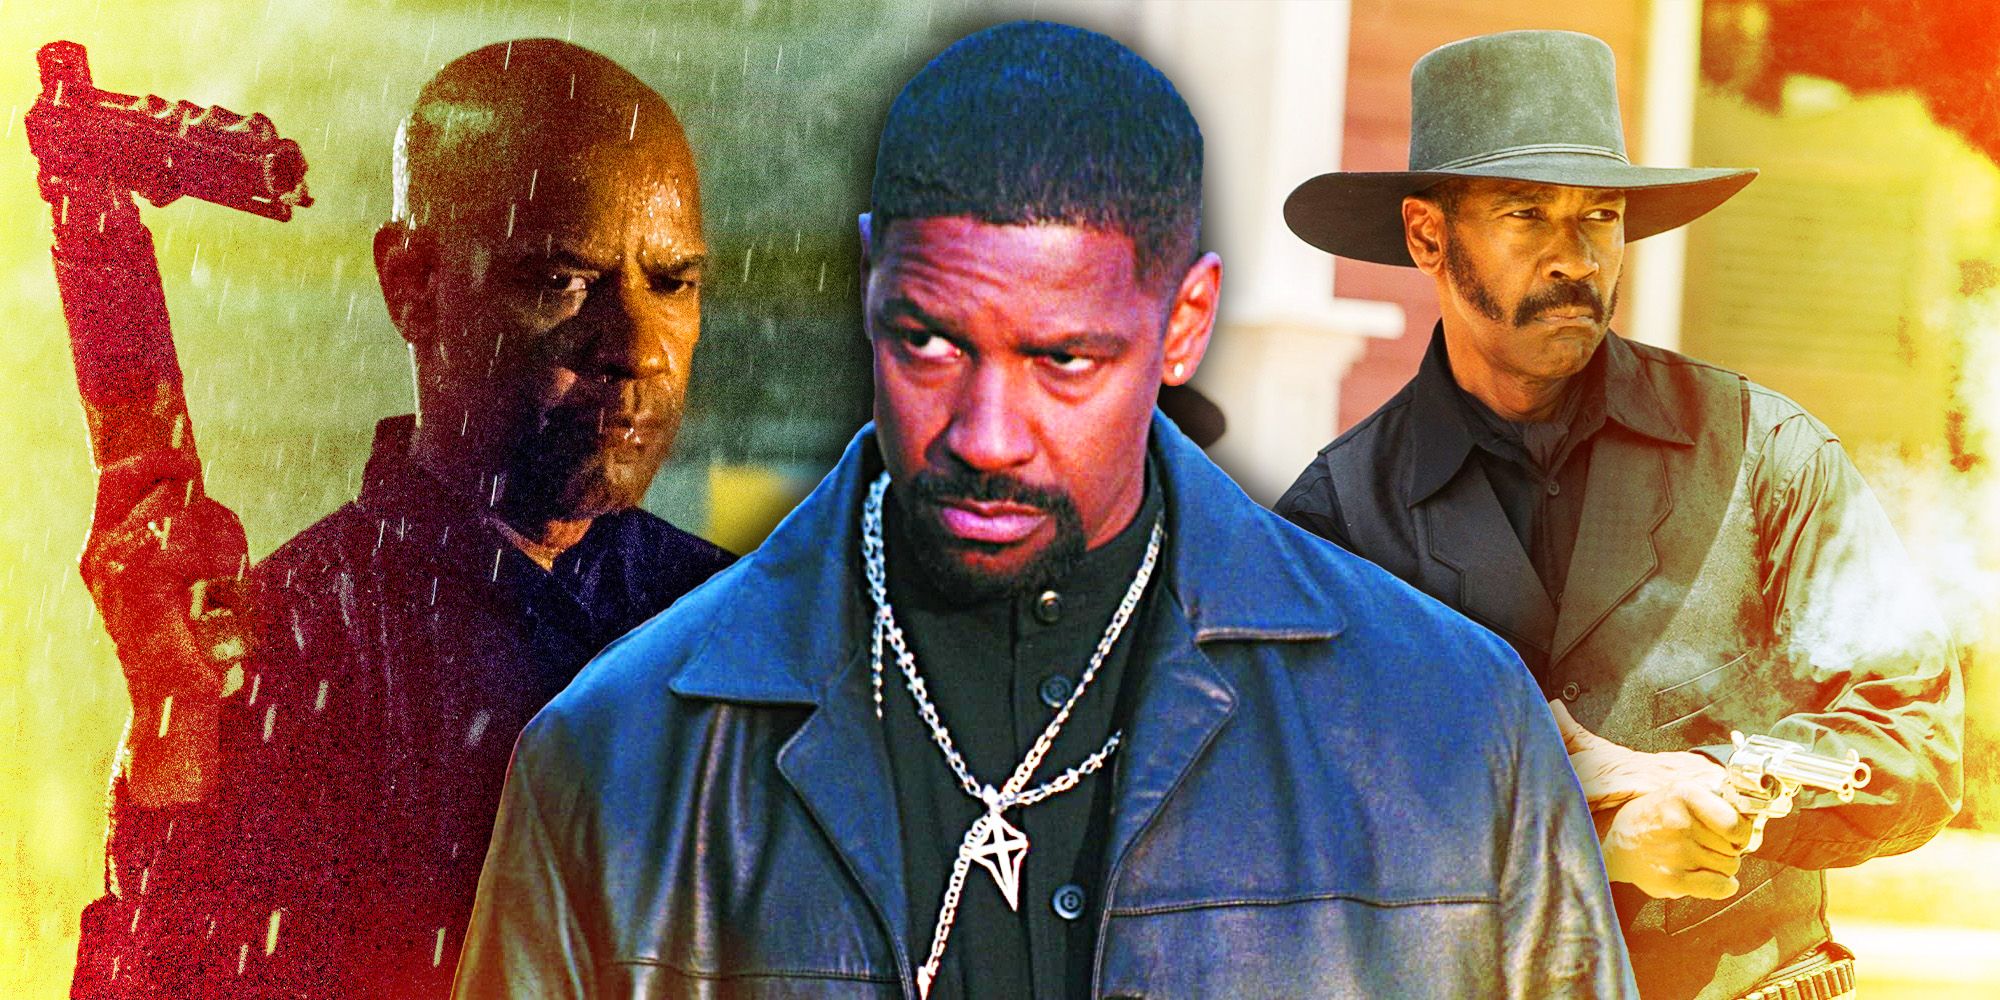 Denzel Washington in The Equalizer, Training Day, and The Magnificent Seven